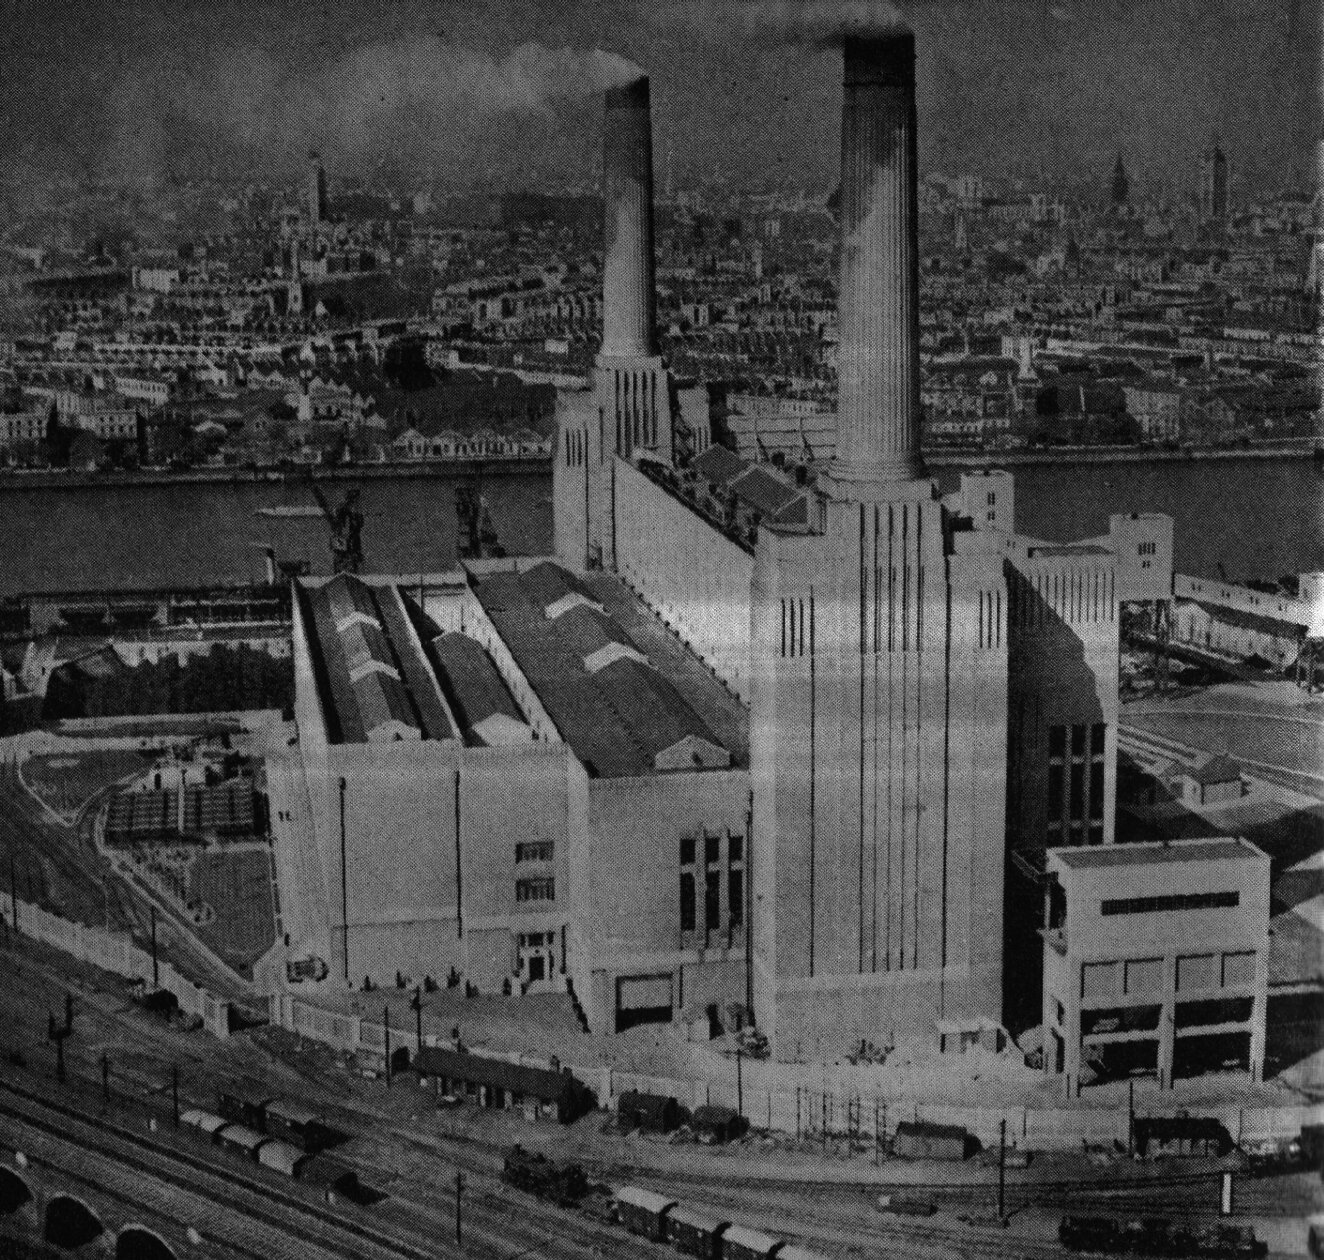 Black and white photograph of the Battersea Power Station in London.